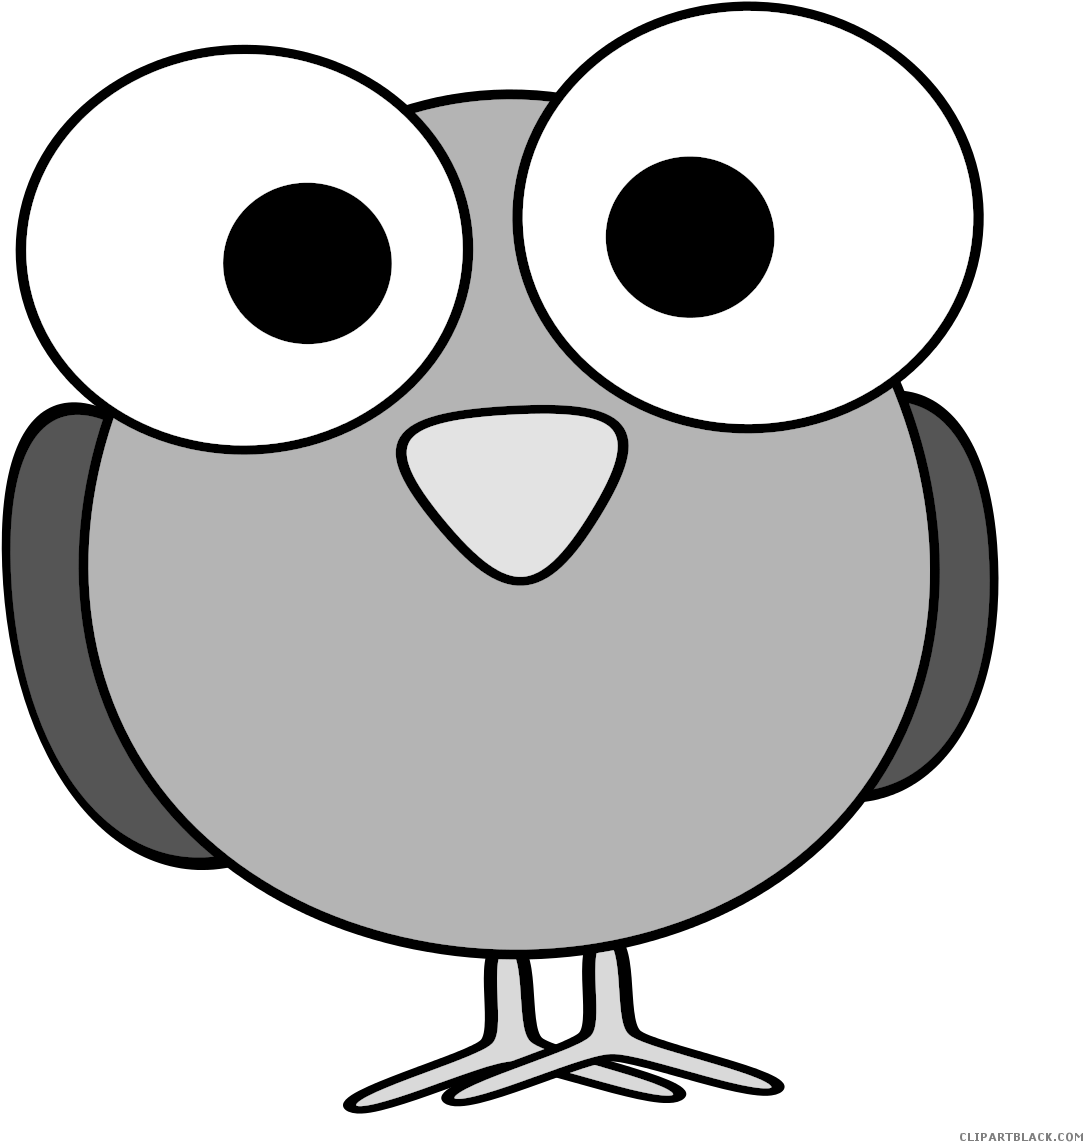 Bird Face Animal Free Black White Clipart Images Clipartblack - Cartoon With Big Eyes (1200x1170)